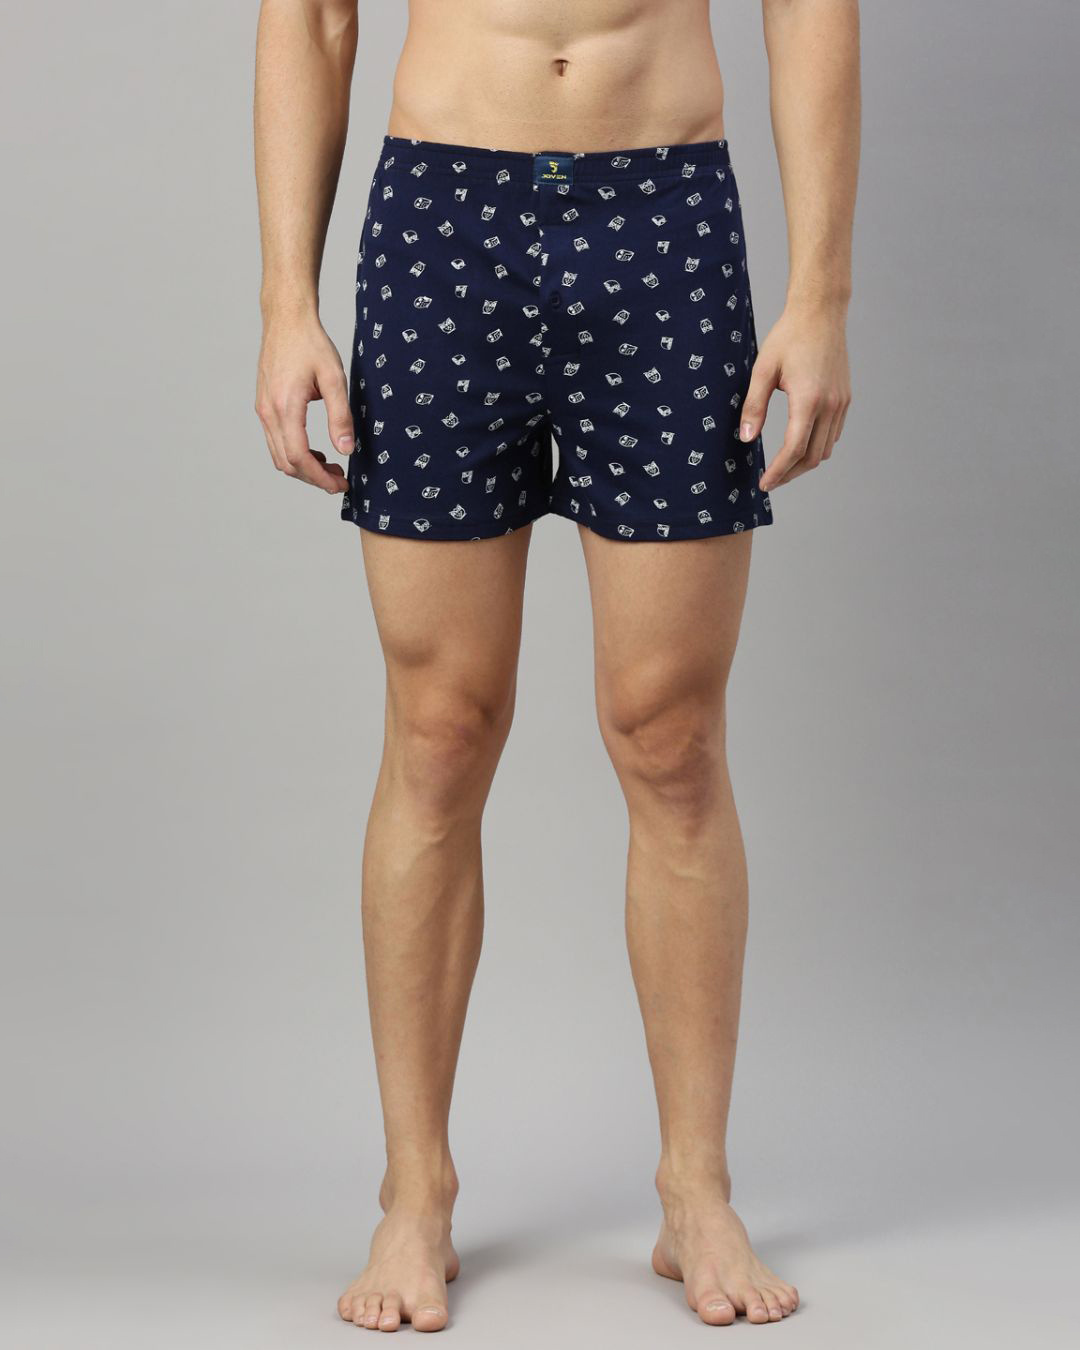 Buy Men's Blue All Over Owls Printed Cotton Boxers Online in India at ...